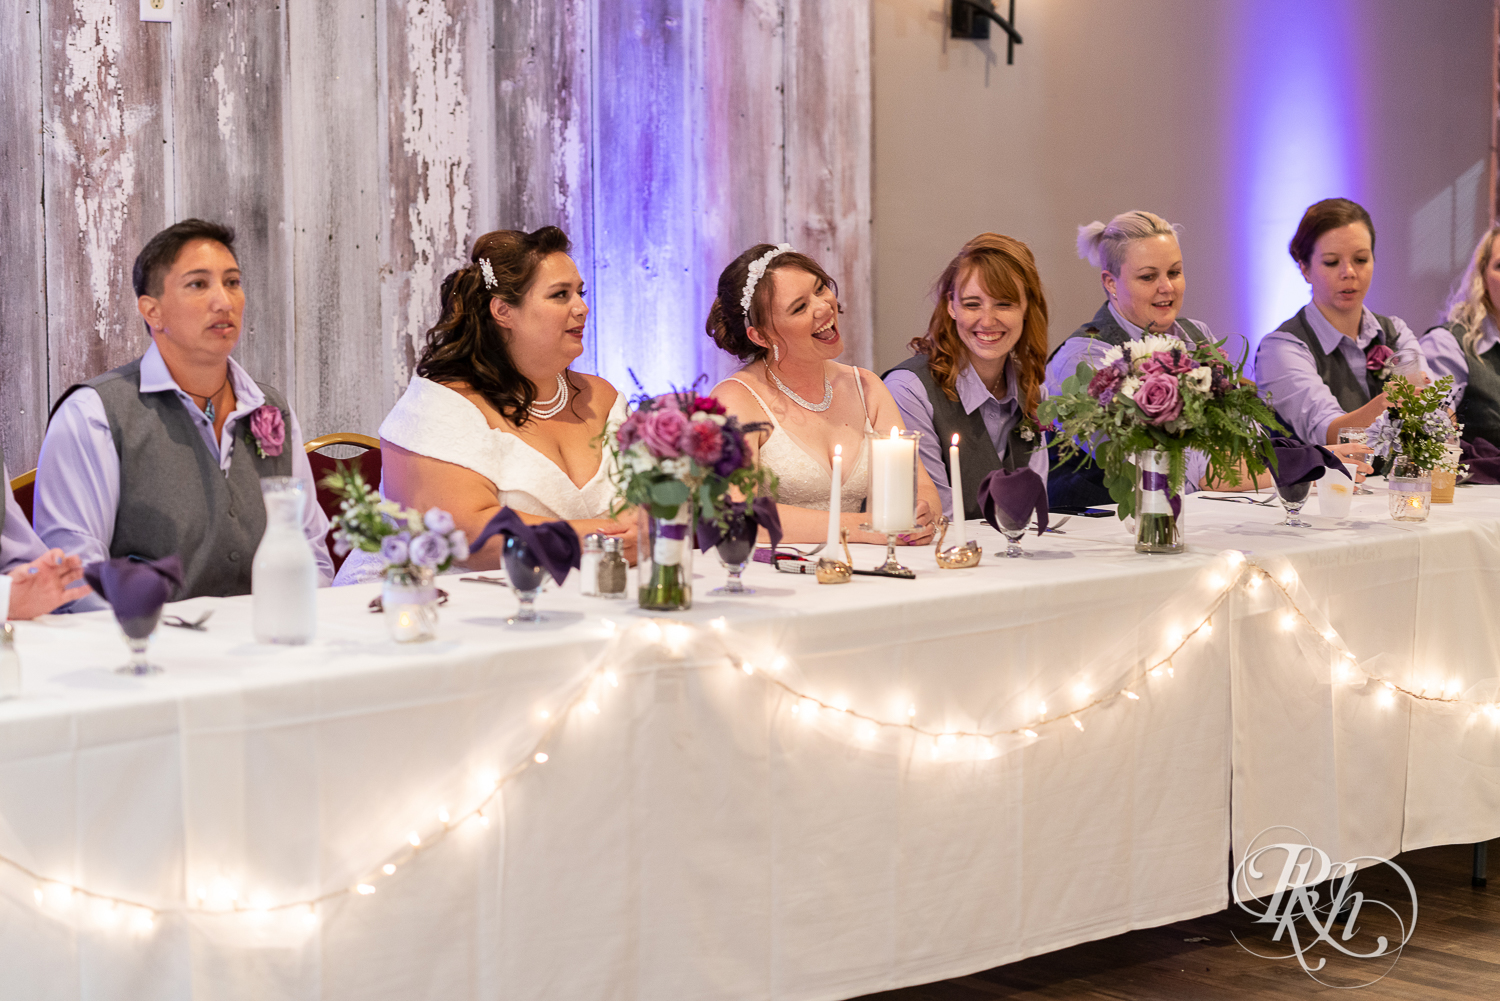 Lesbian brides at head table at wedding reception at Willy McCoy's in Champlin, Minnesota.